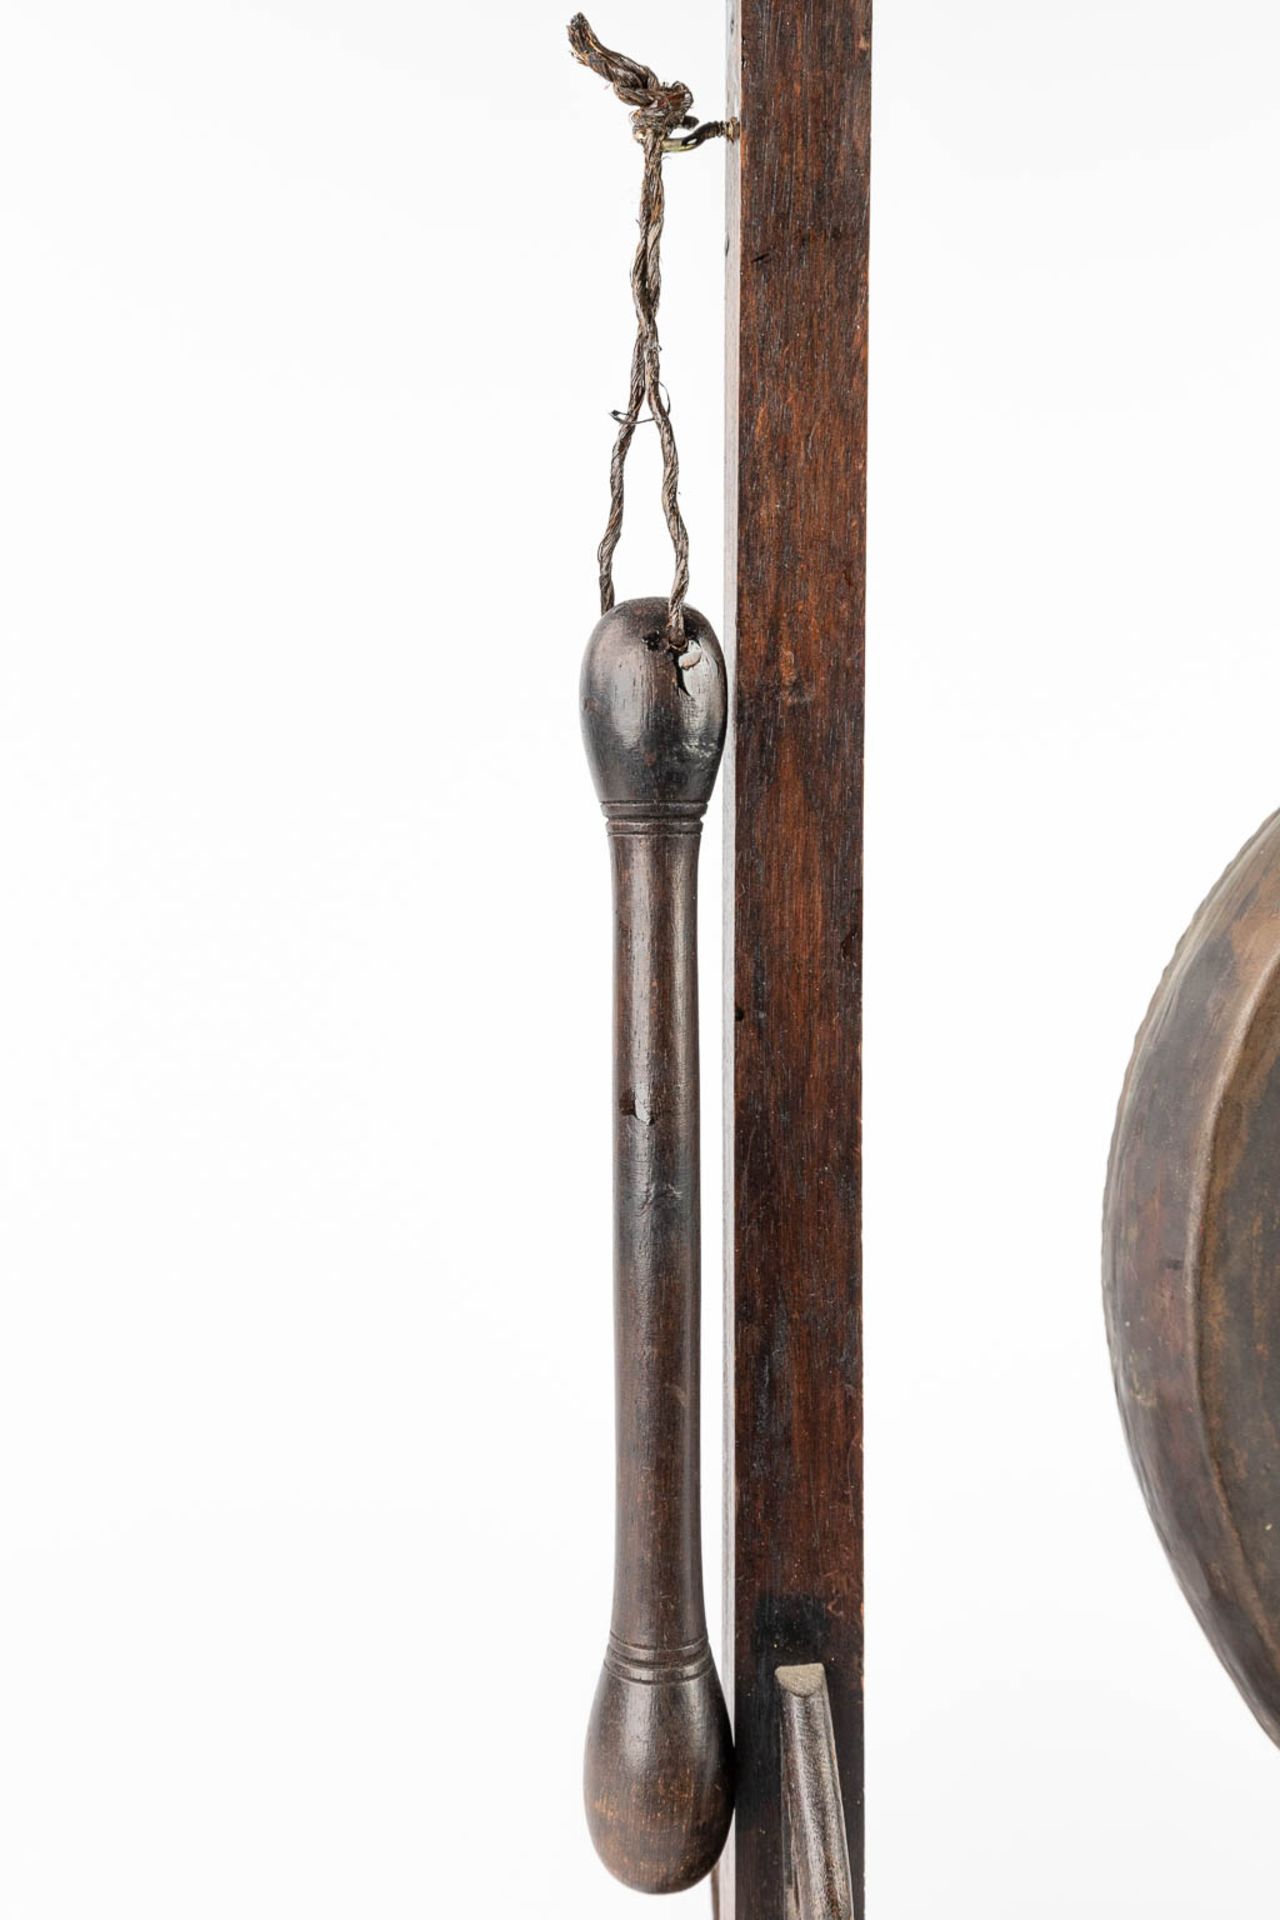 3 bells and a gong, Oriental. 19th/20th C. (L:13 x W:47 x H:55 cm) - Image 5 of 28